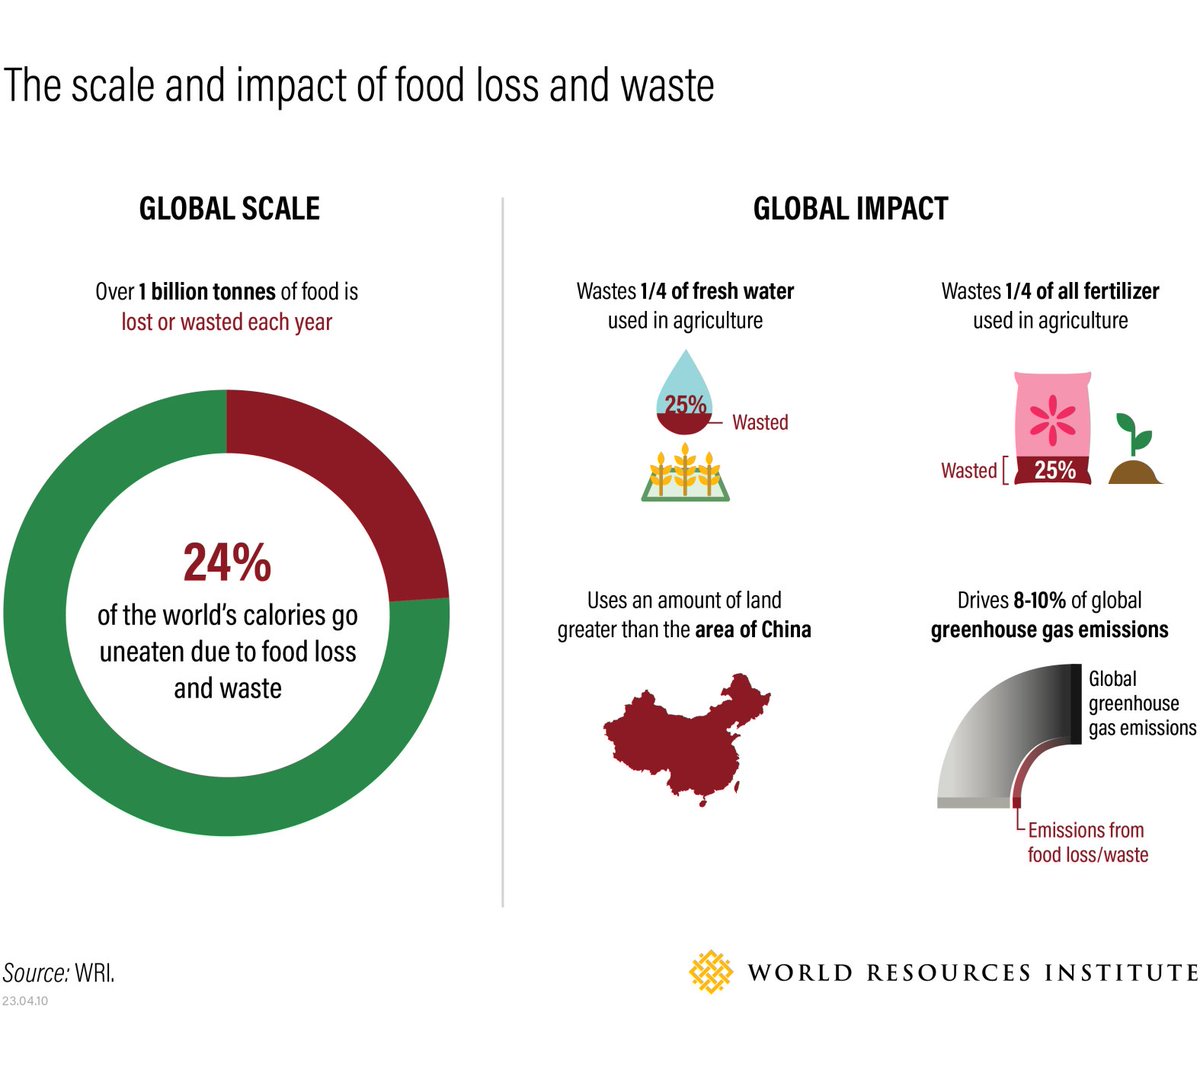 #FoodLossAndWaste drives 8-10% of global GHG emissions by wasting energy and inputs used to produce food that is not eaten + the methane that results from rotting food. Reducing FLW is essential to reducing GHG emissions 👇

bit.ly/3LDHyuM  

#WasteLessFeedMore